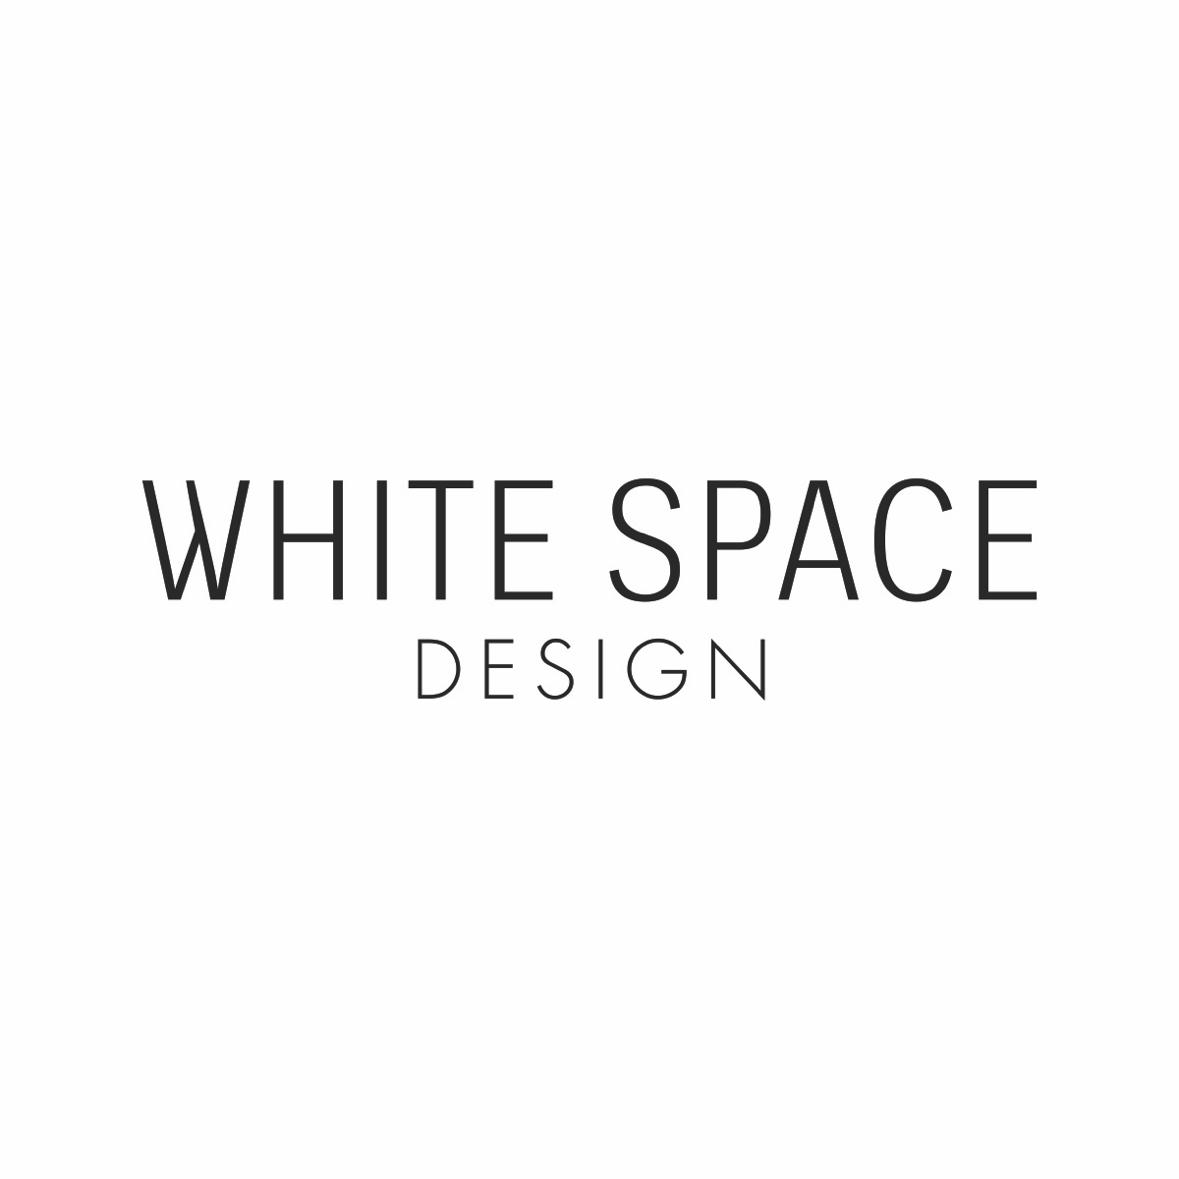 White Space's images